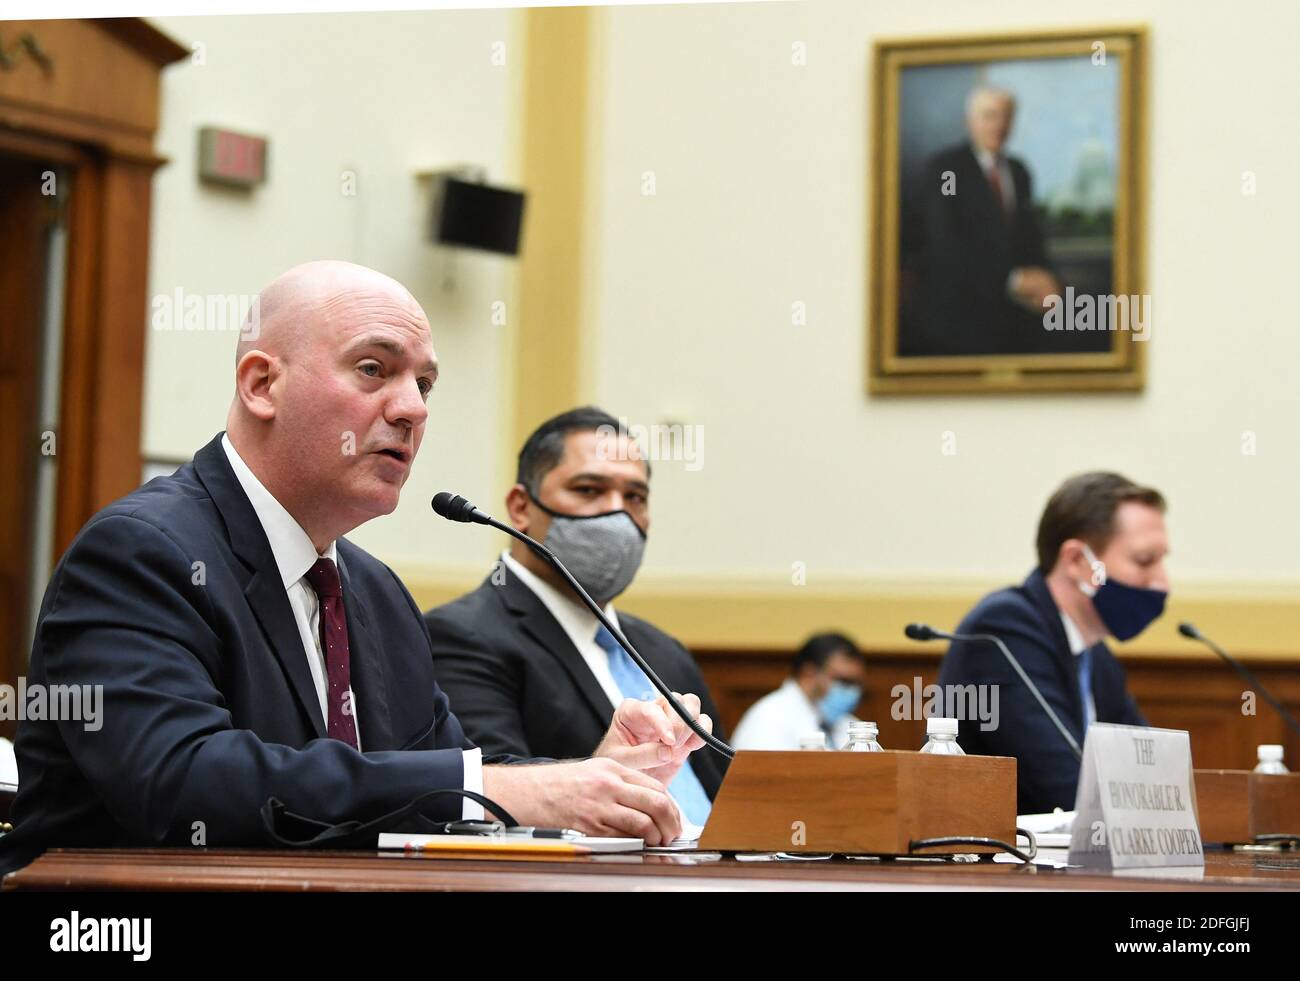 R. Clarke Cooper (L), Assistant Secretary of State for Political-Military Affairs, Brian Bulatao (C), Under Secretary of State for Management, and Marik String, Acting Legal Adviser for the State Department, testify before a House Committee on Foreign Affairs hearing looking into the firing of State Department Inspector General Steven Linick, on Capitol Hill in Washington, D.C. on Wednesday, September 16, 2020. Photo by Kevin Dietsch/Pool/ABACAPRESS.COM Stock Photo